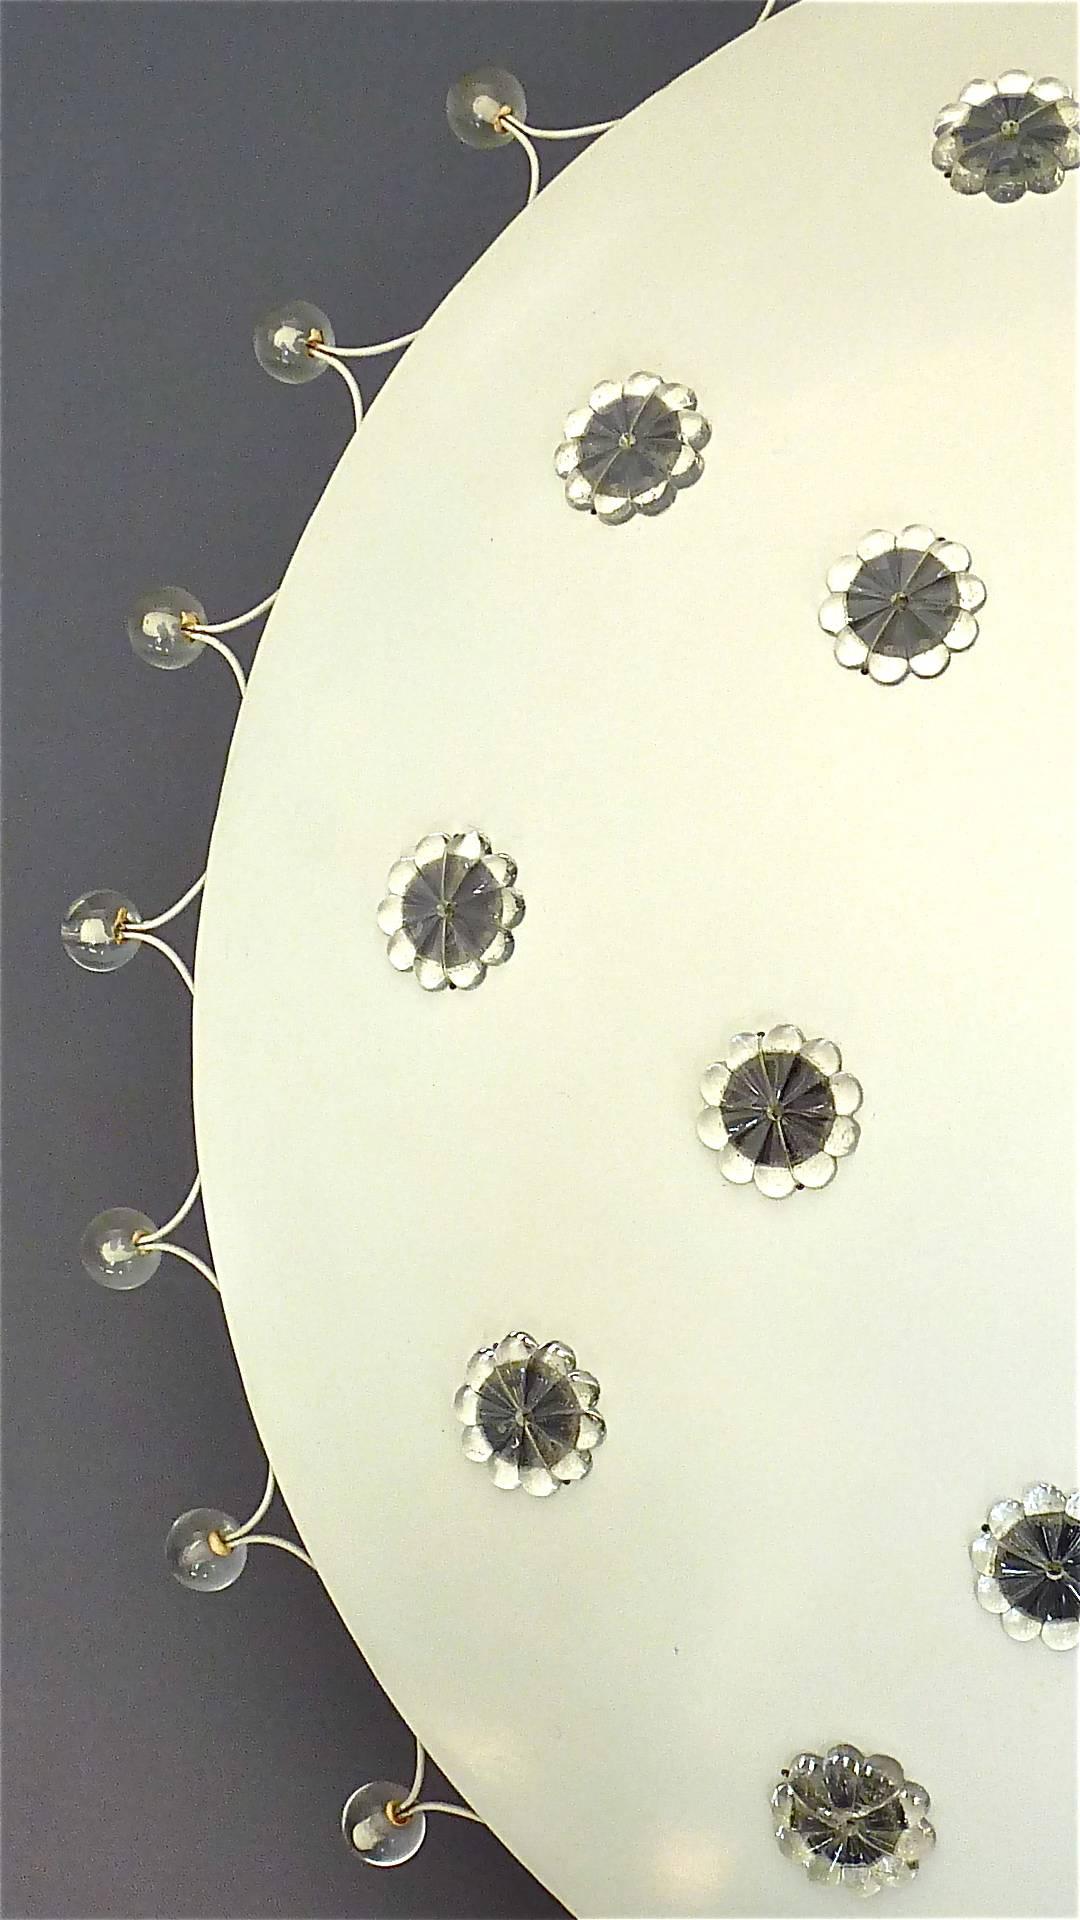 Large starburst ceiling light or chandelier in white enameled metal with patinated brass canopy, round glass flower applications and glass pearls, designed by Emil Stejnar and executed by Rupert Nikoll, Austria, 1950s. This large version of 50 cm /